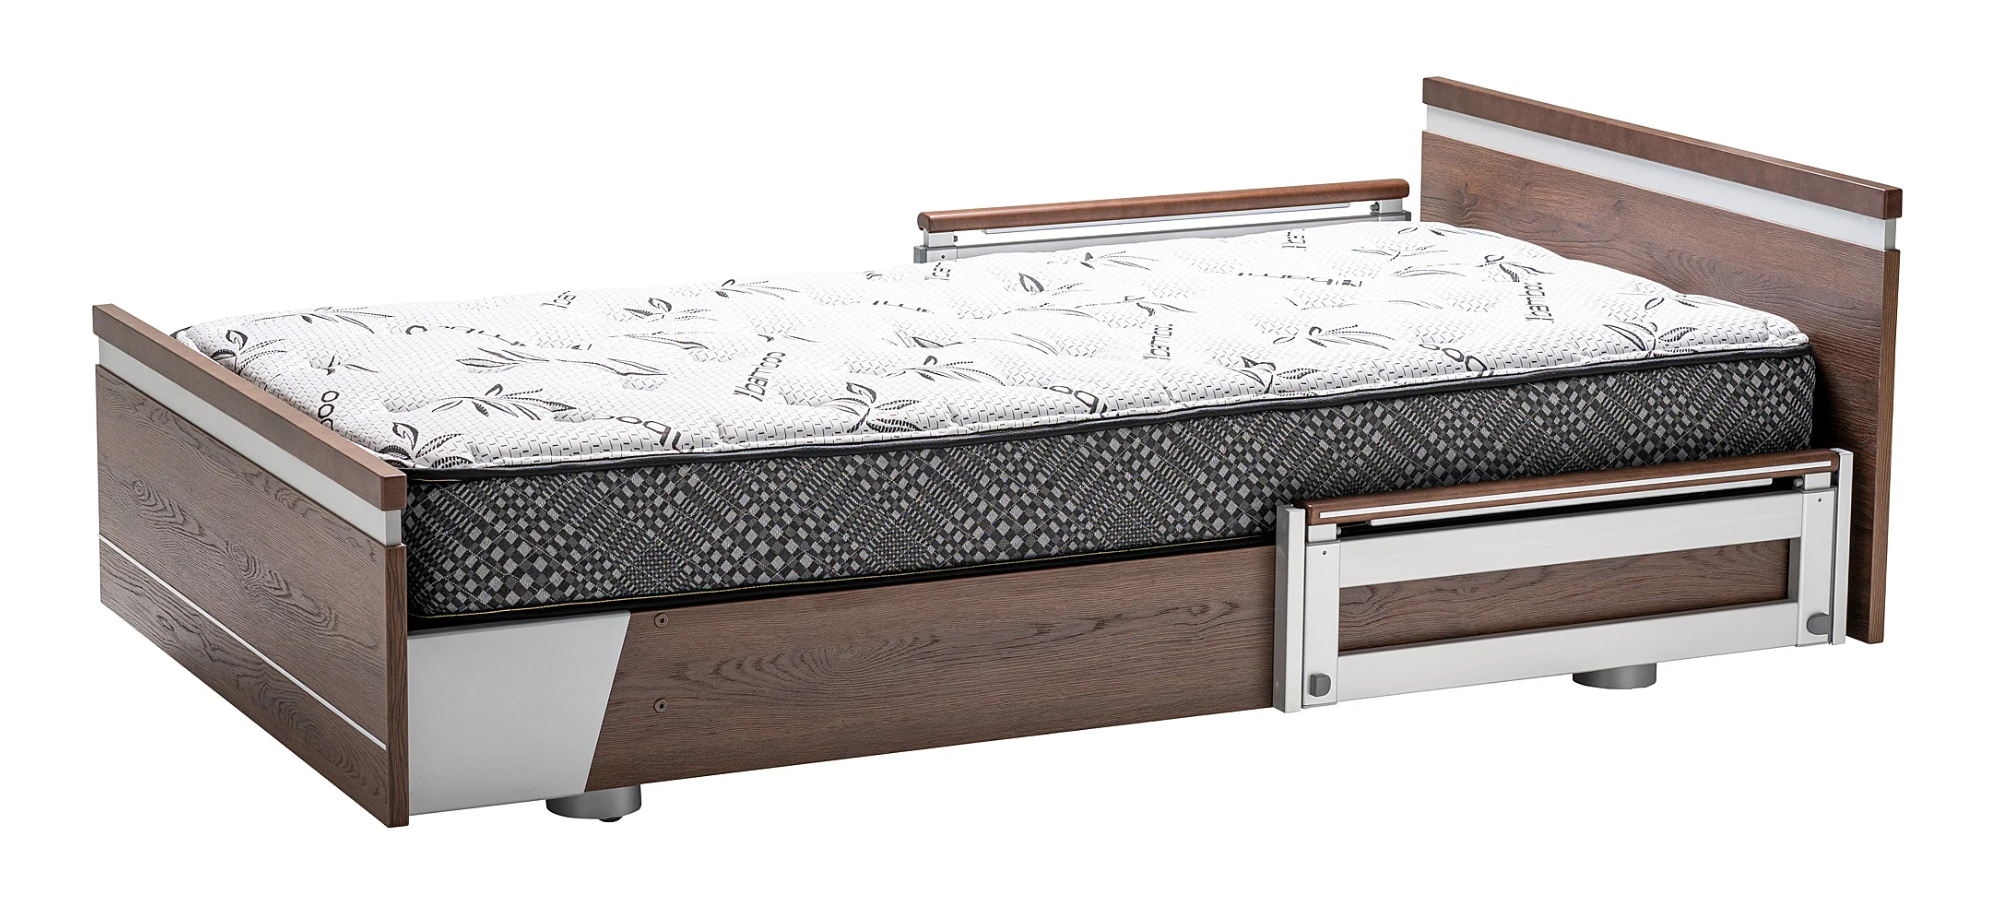 hospital bed Oklahoma Home Hospital Beds in Oklahoma | Buy Hospital Bed Oklahoma